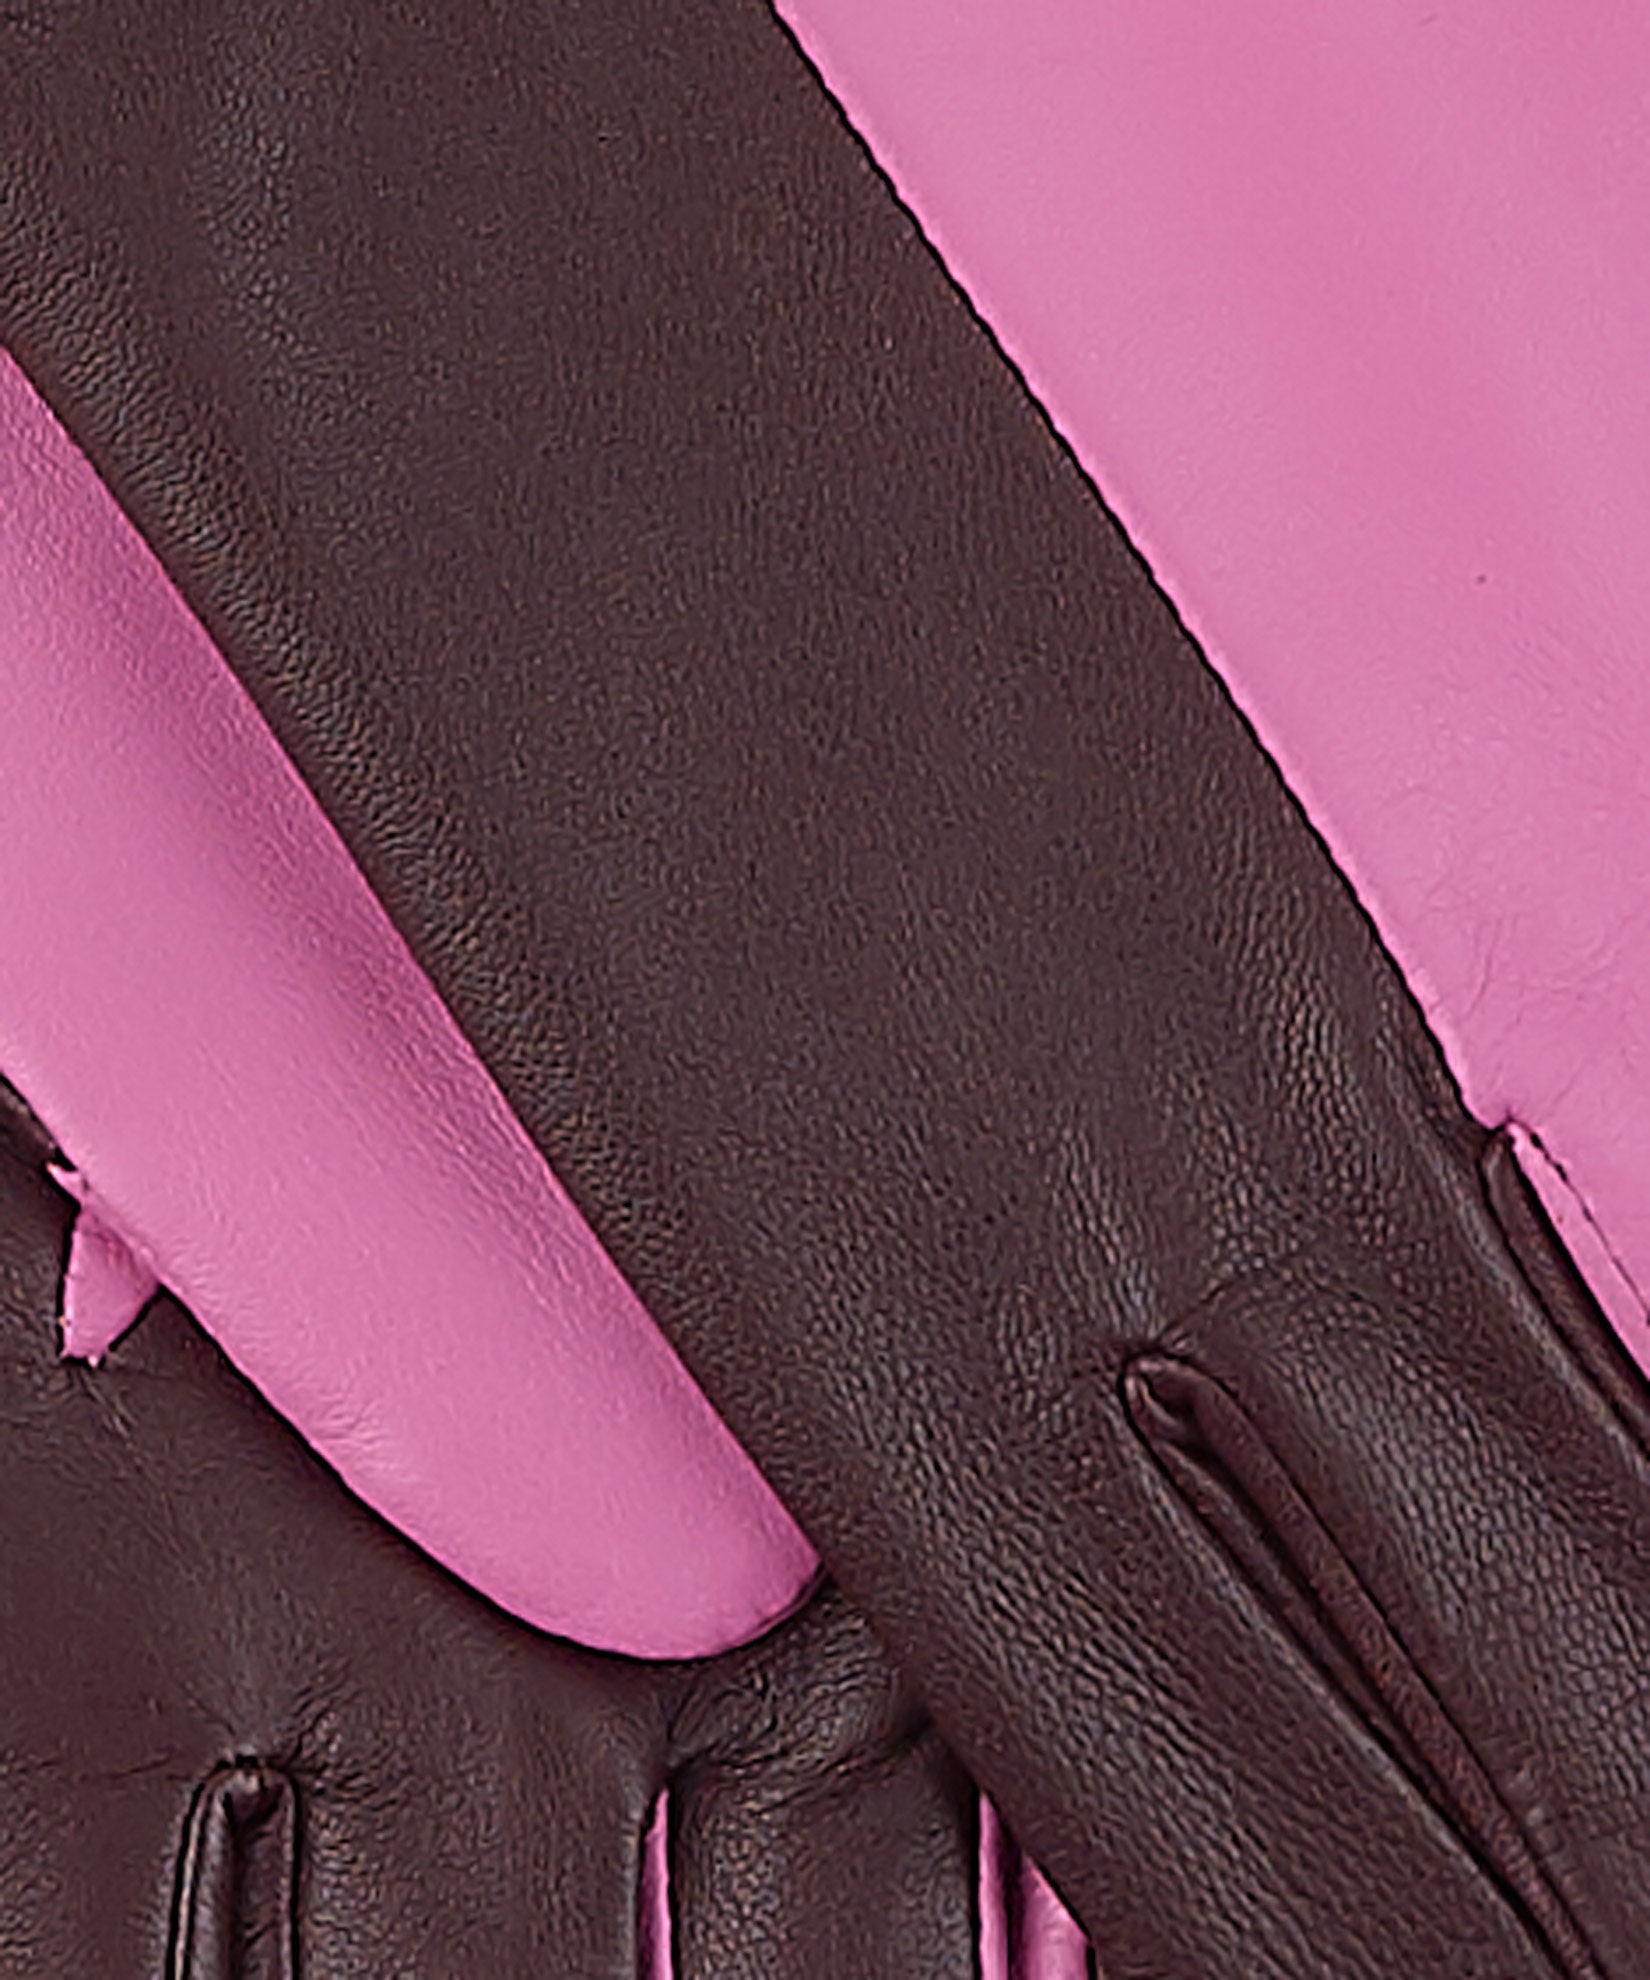 Leather Colorblock Glove in color Fig